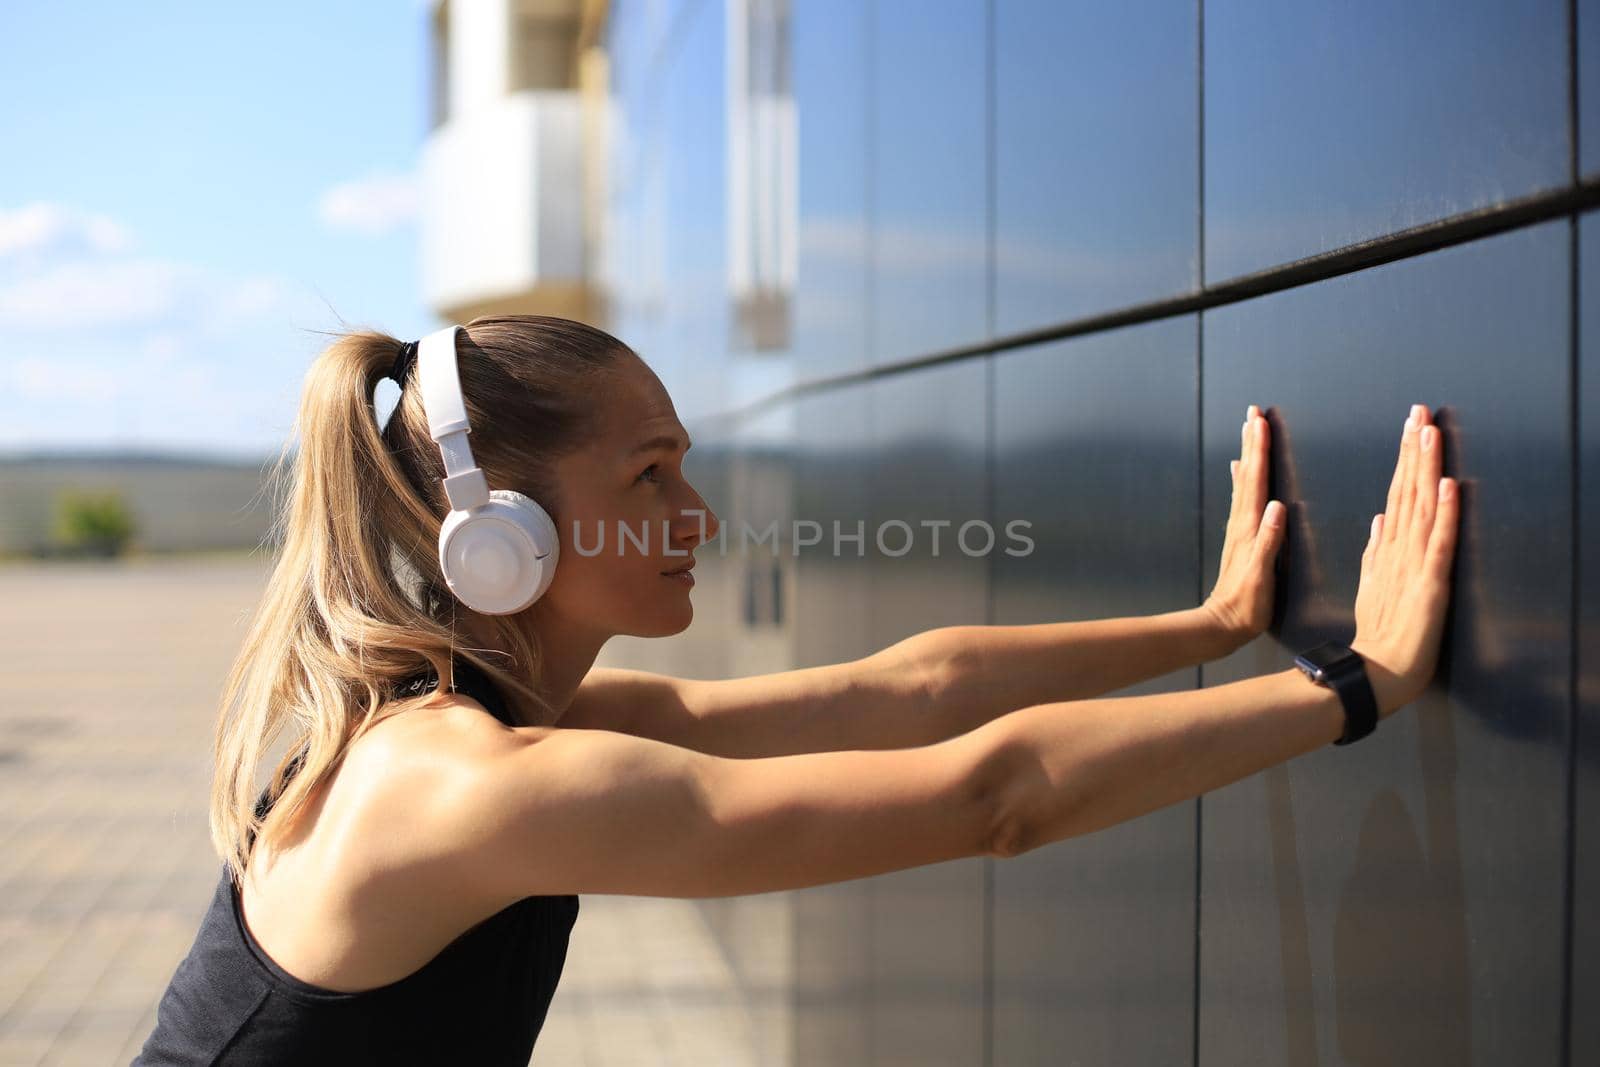 Attractive young fitness woman wearing sports clothing exercising outdoors, stretching exercises